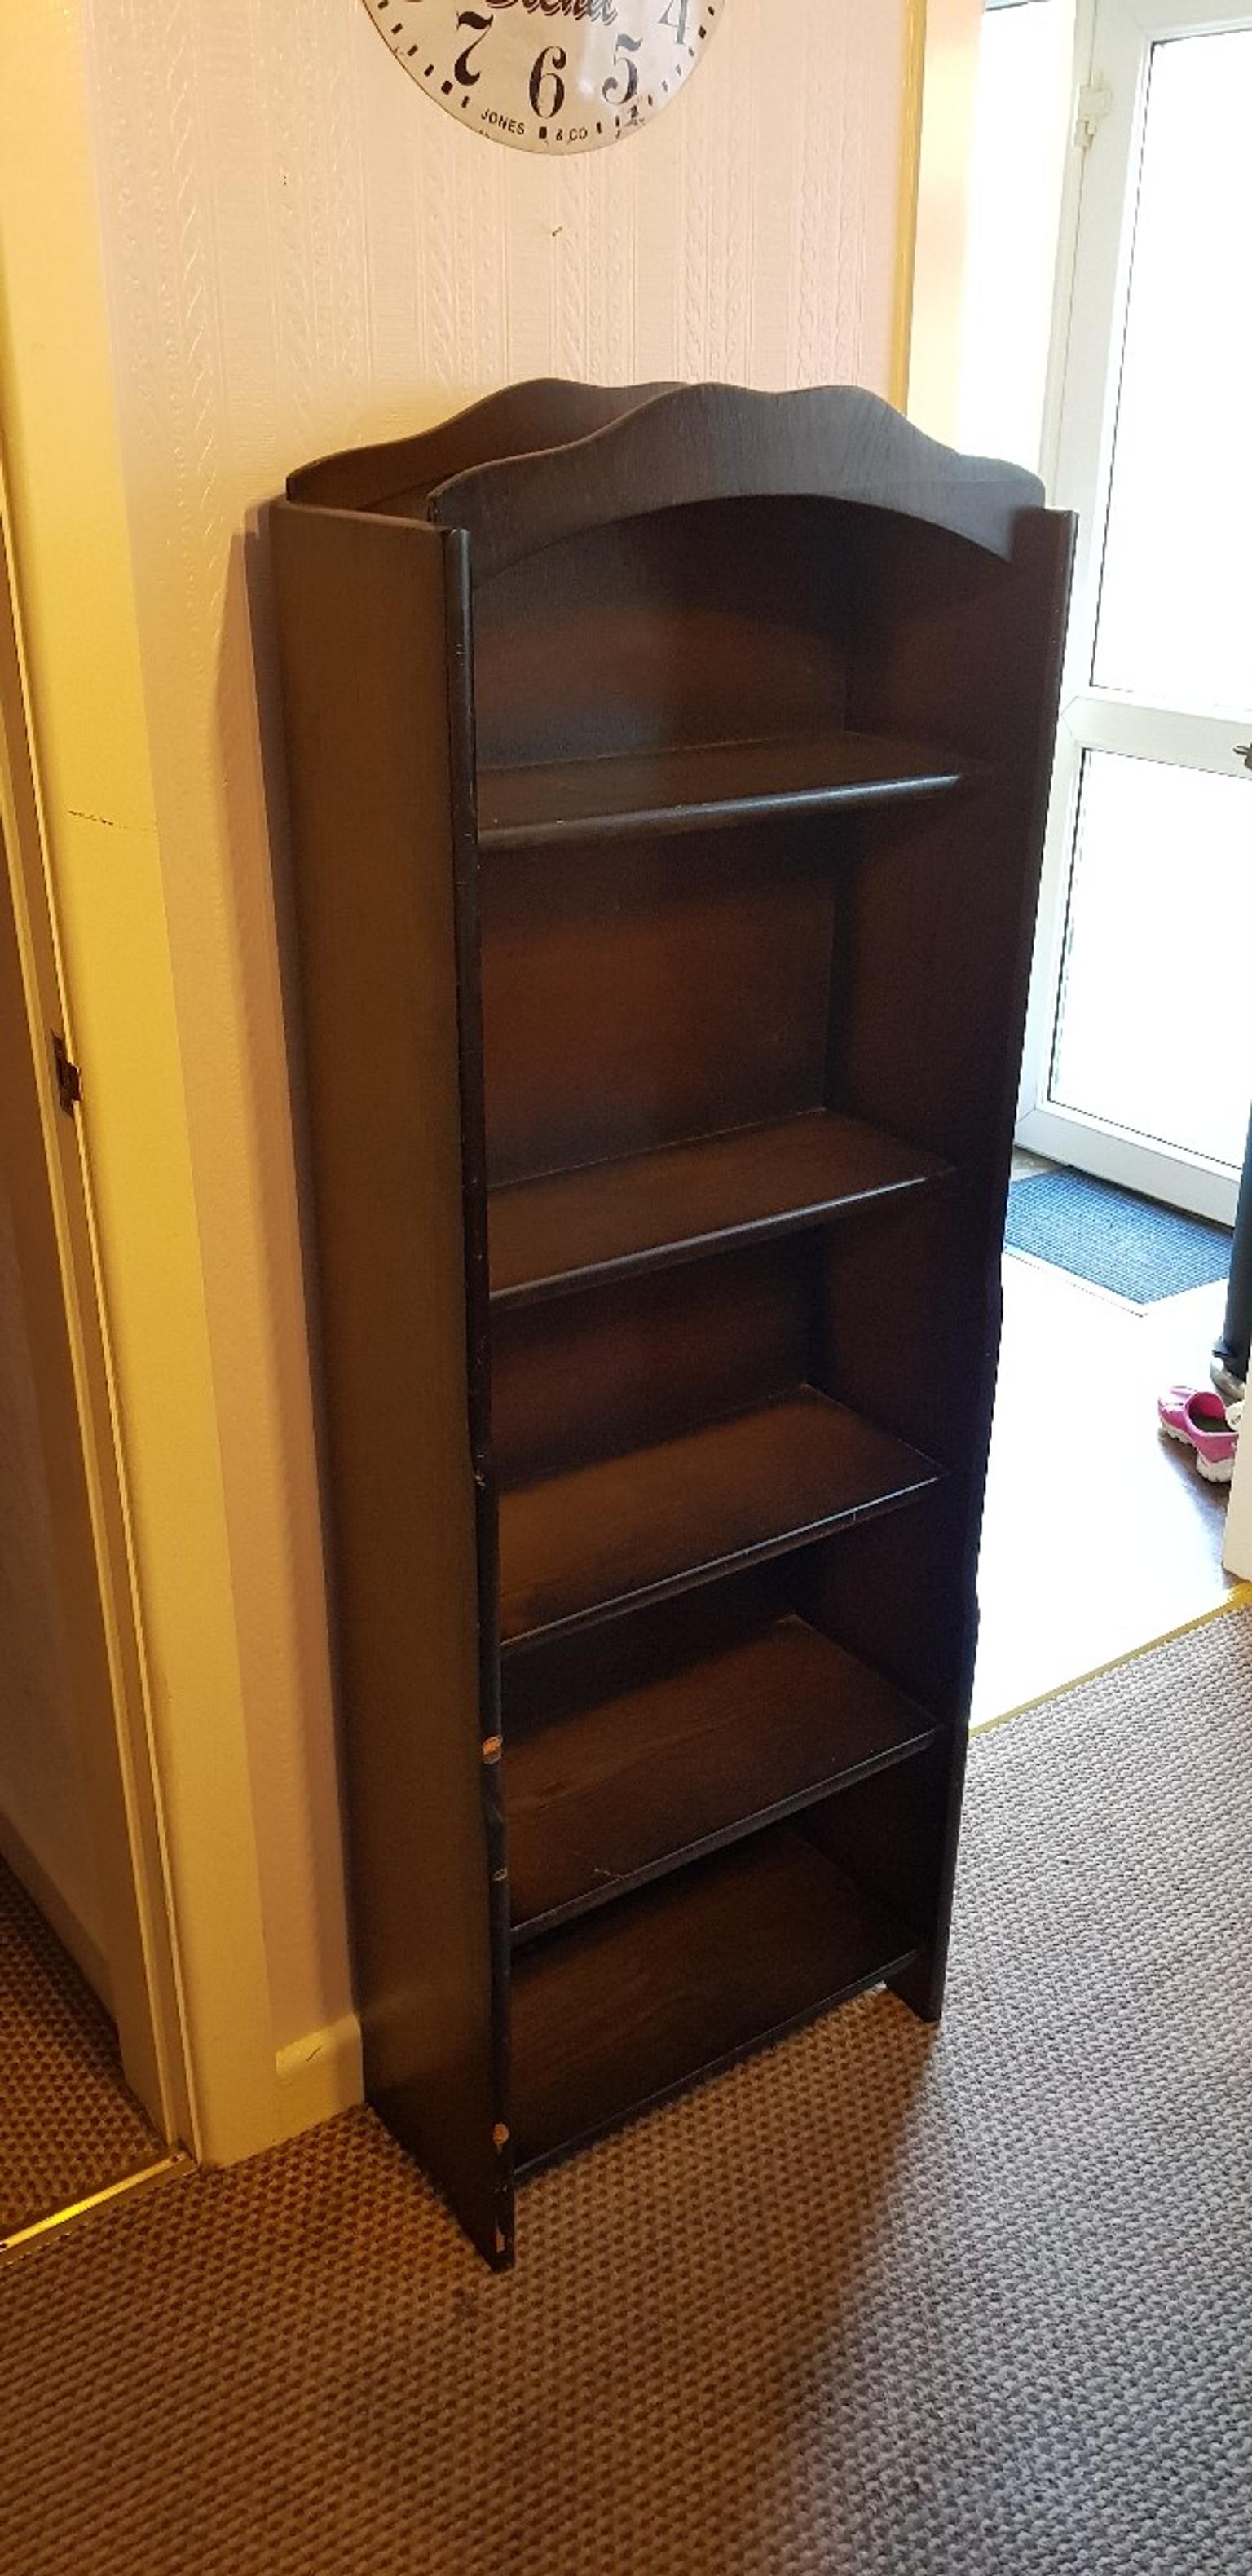 Small Wooden Bookcase In Wyre For 7 00, Small Wooden Bookcase